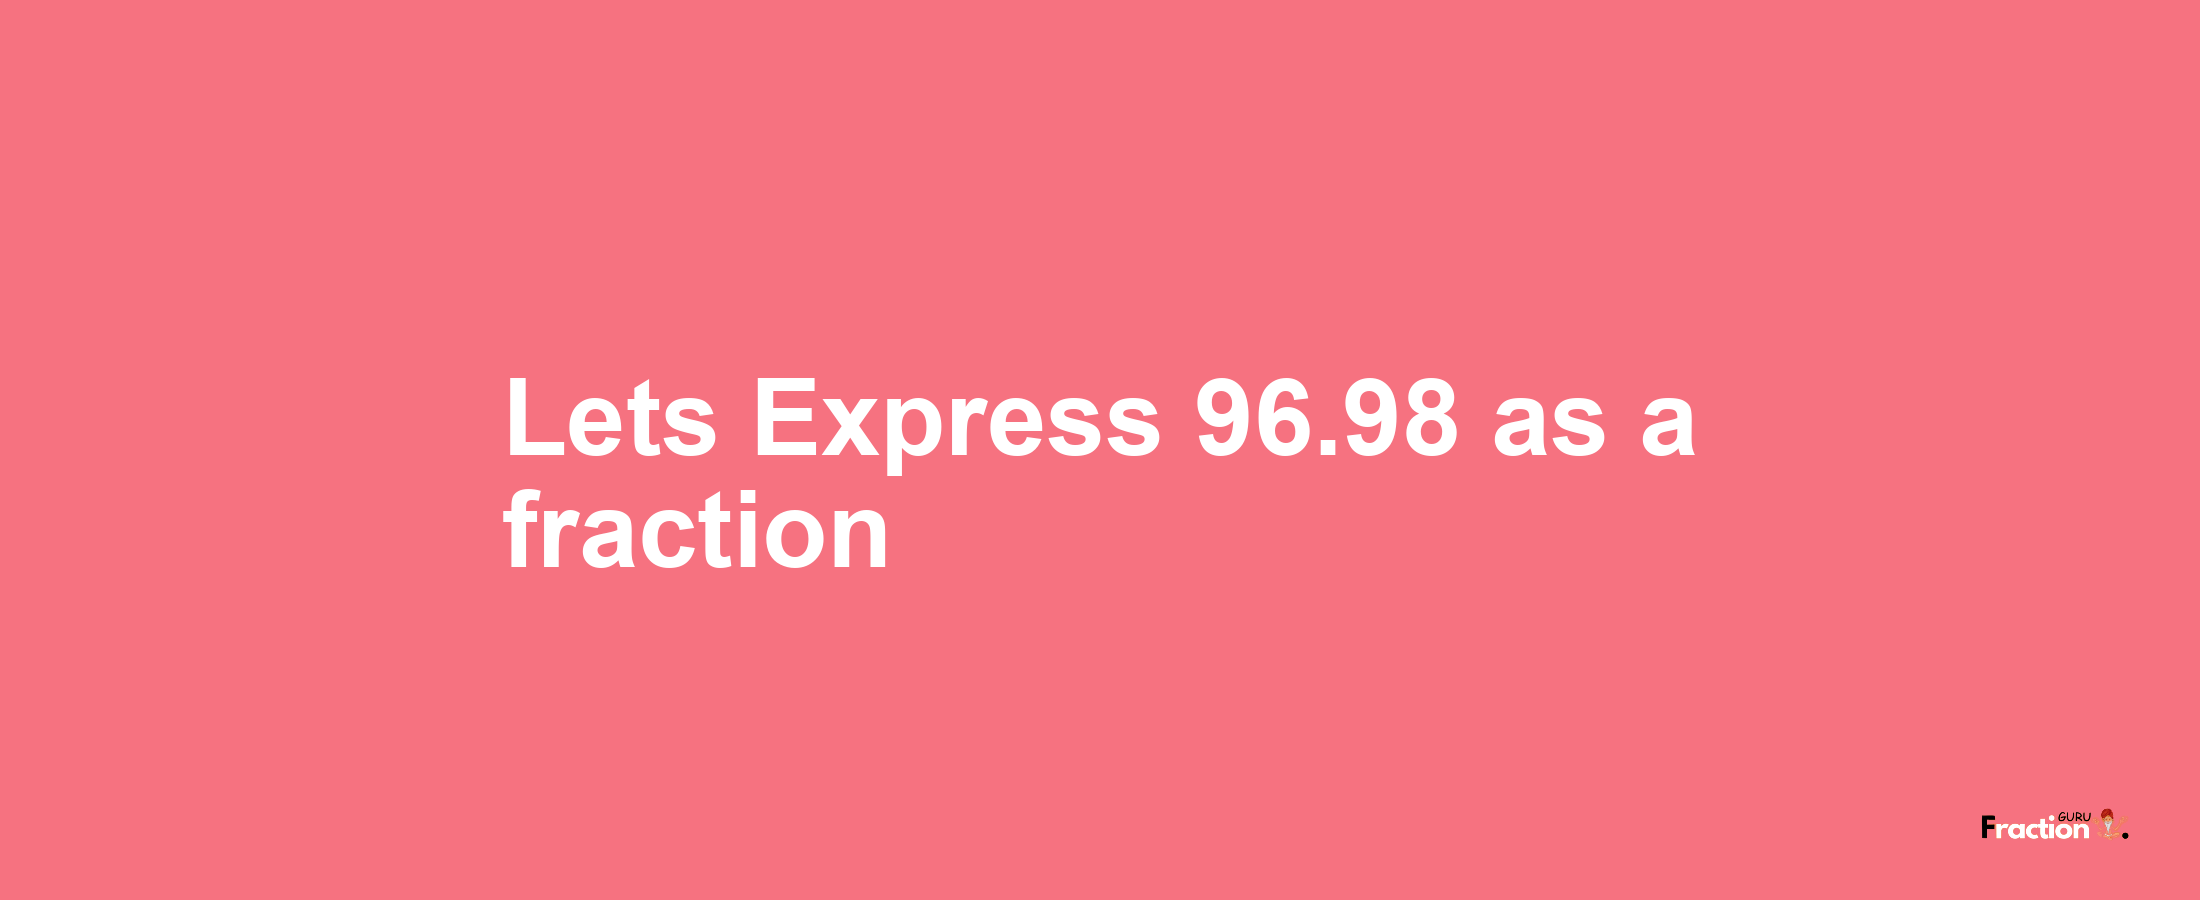 Lets Express 96.98 as afraction